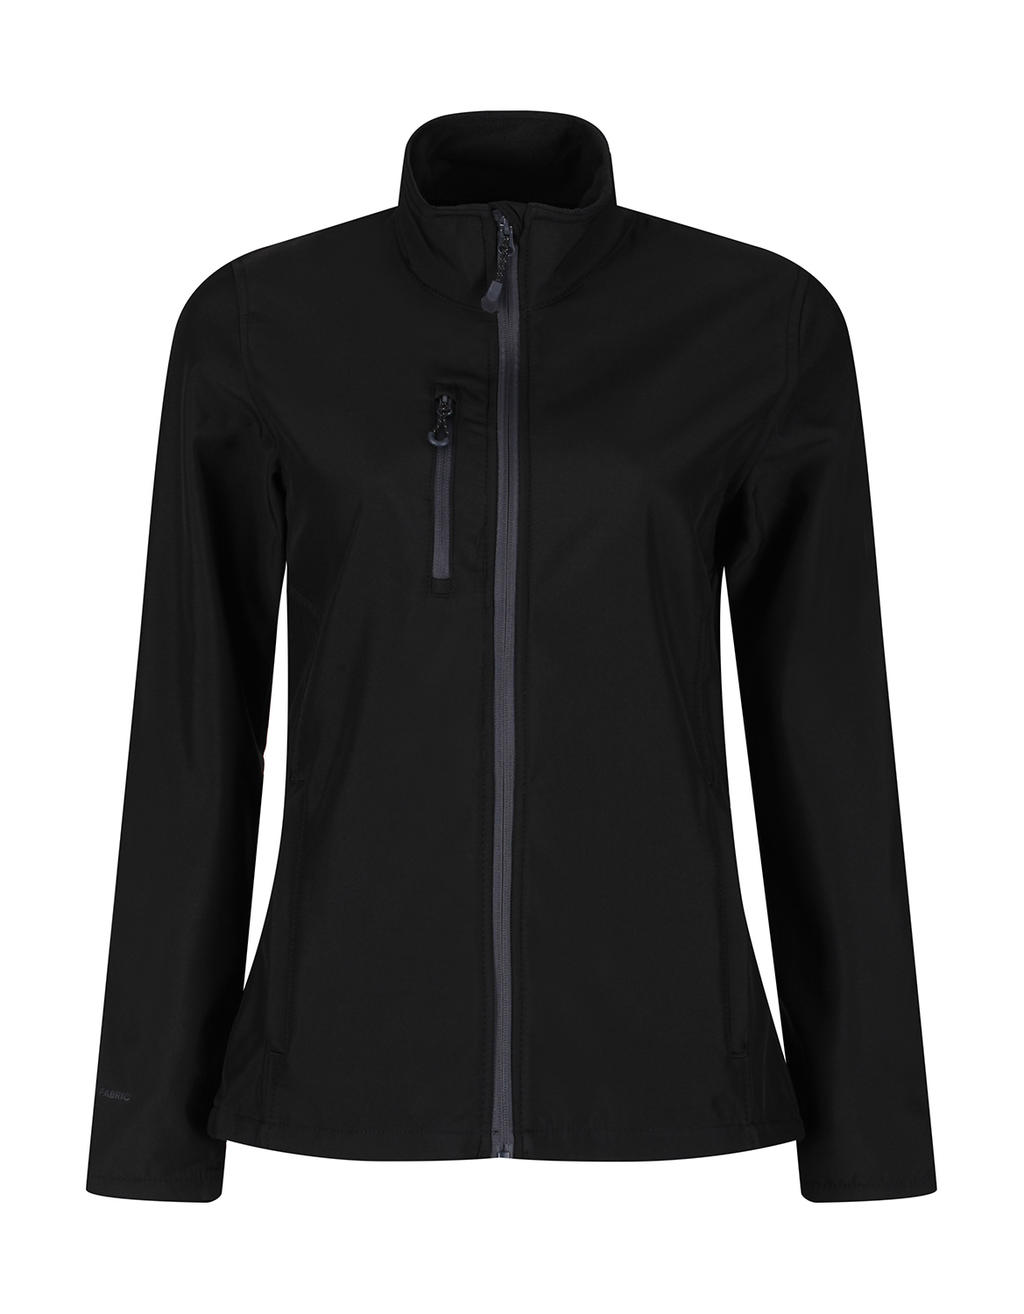  Womens Honestly Made Recycled Softshell Jacket in Farbe Black